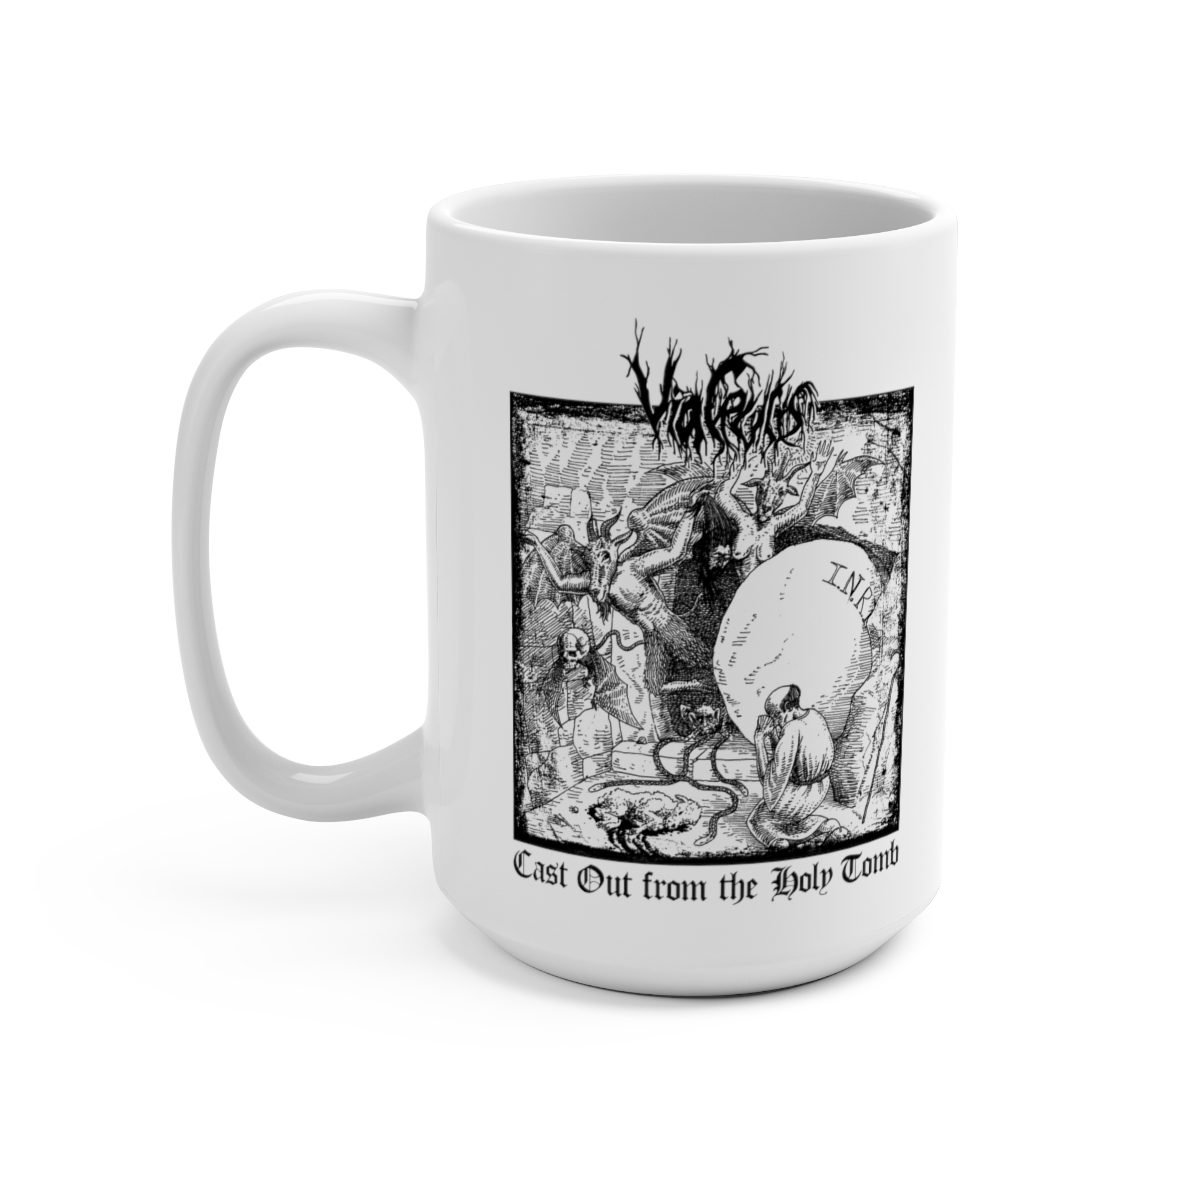 Via Crucis – Cast Out from the Holy Tomb 15oz White Mug